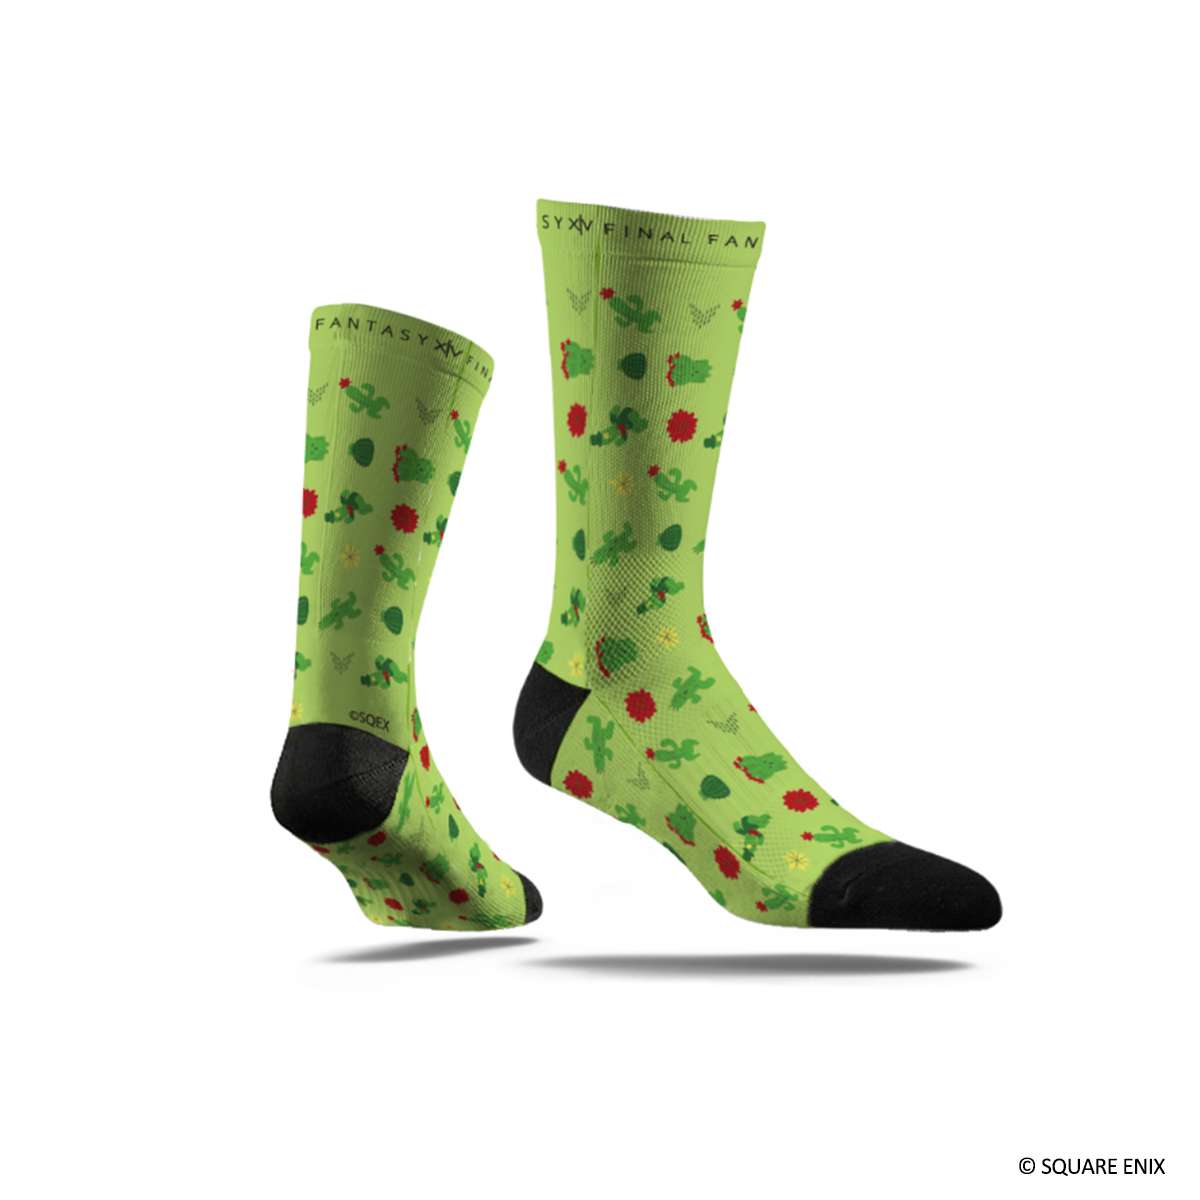 A pair of green socks with black toes and heels. The socks are covered with green cactuar and red flower patterns. The  words Final Fantasy 14 are seen on the cuffs.